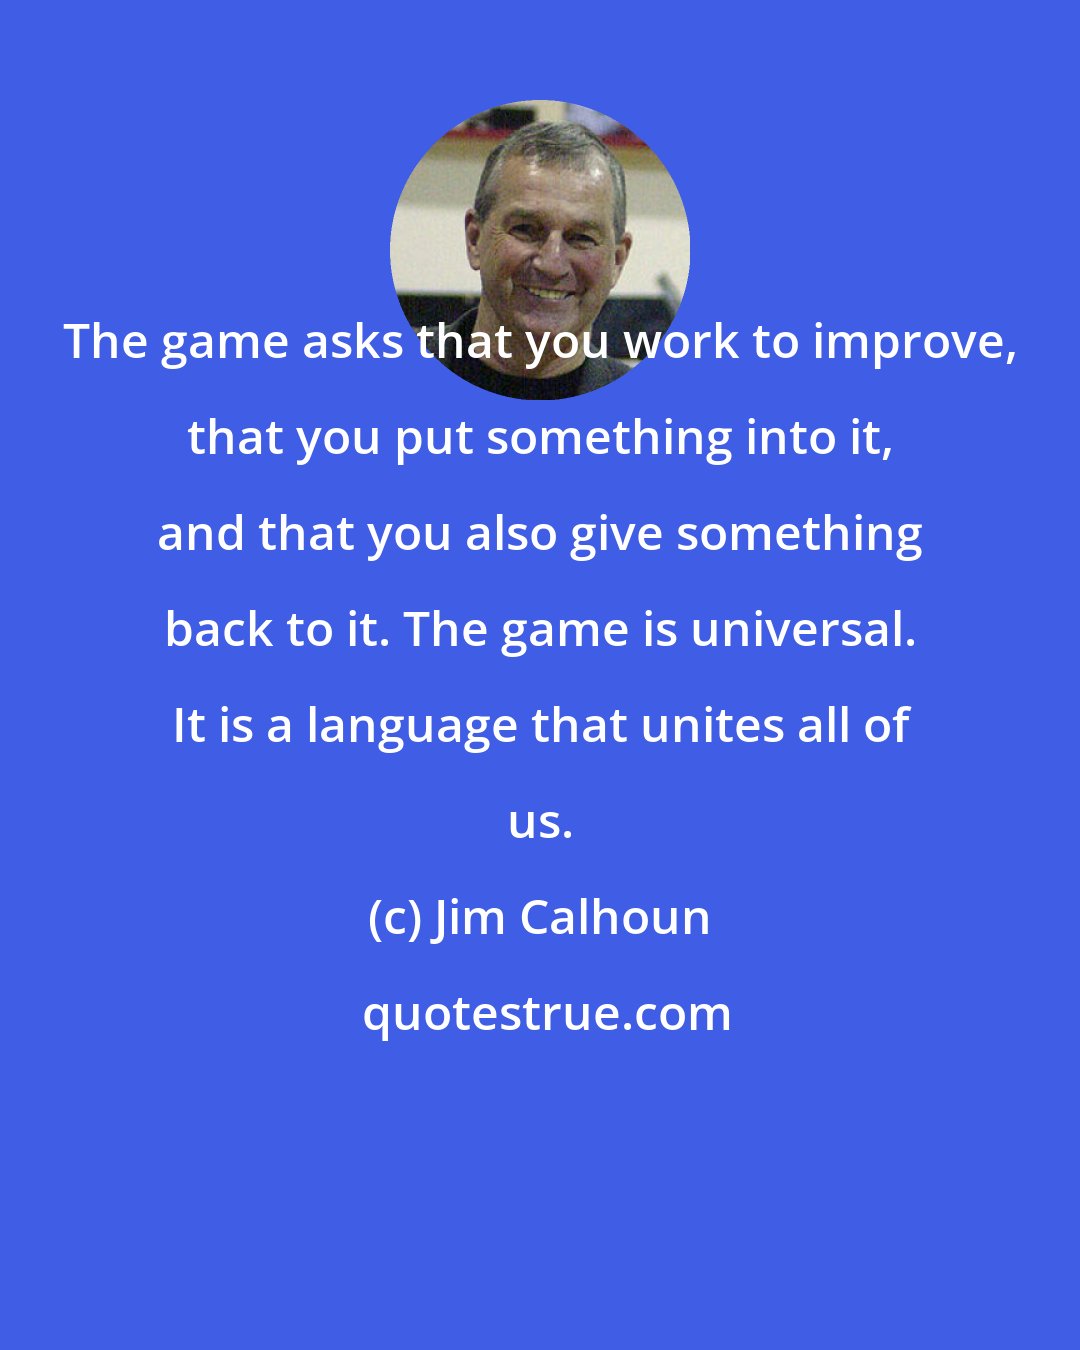 Jim Calhoun: The game asks that you work to improve, that you put something into it, and that you also give something back to it. The game is universal. It is a language that unites all of us.